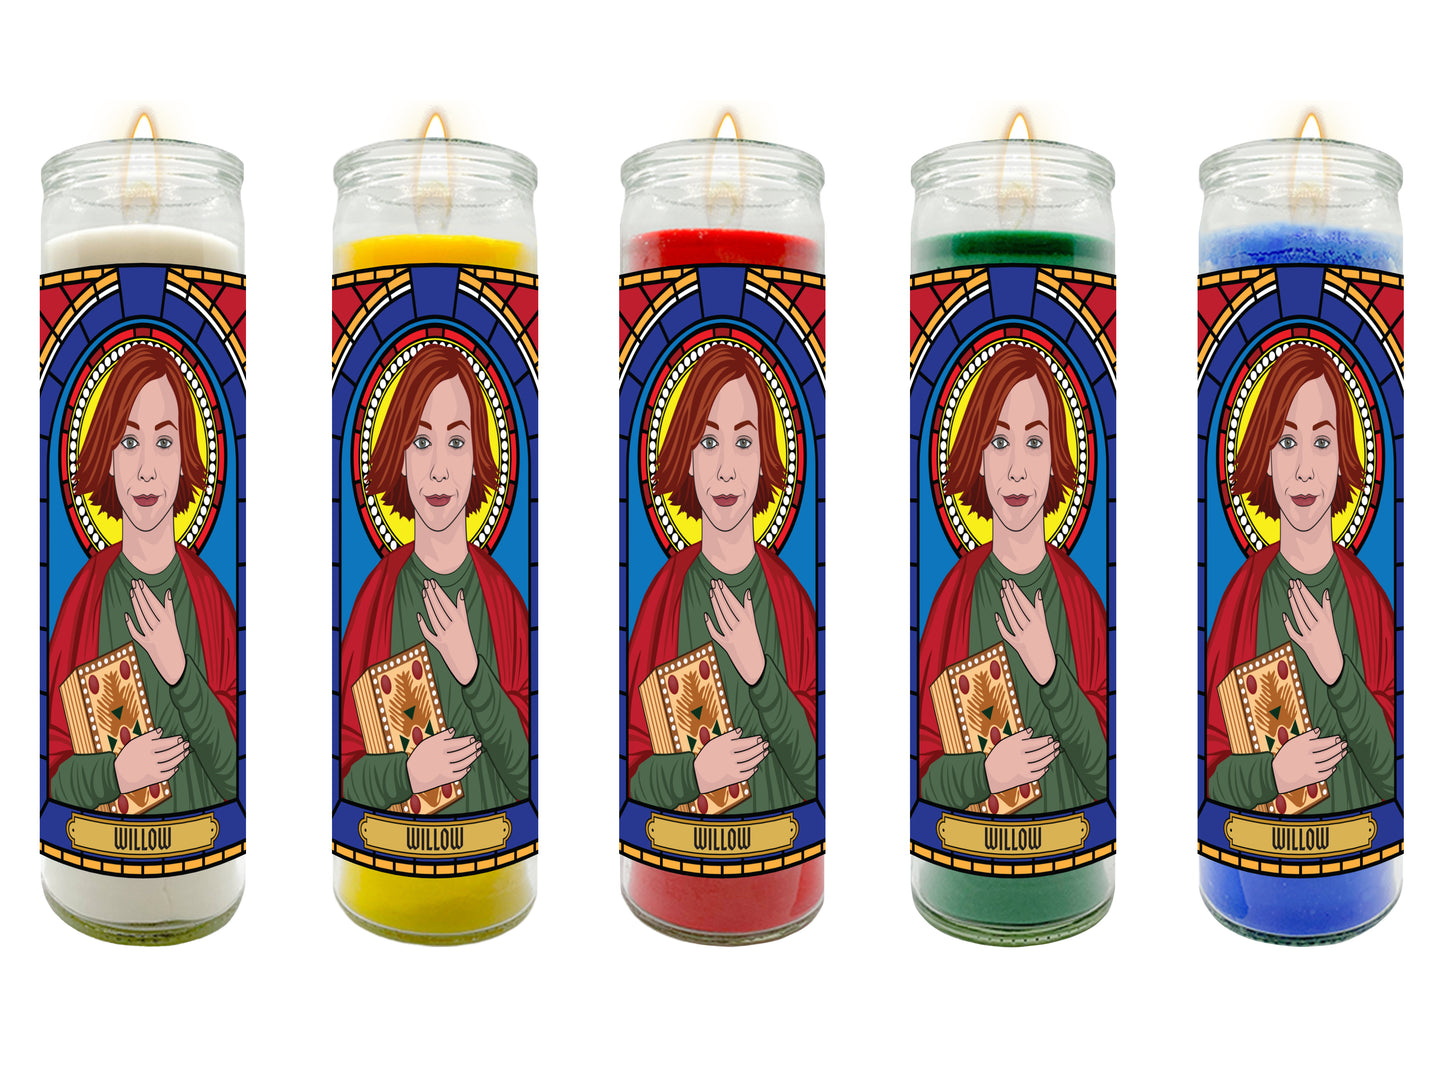 Buffy the Vampire Slayer Illustrated Prayer Candle Series